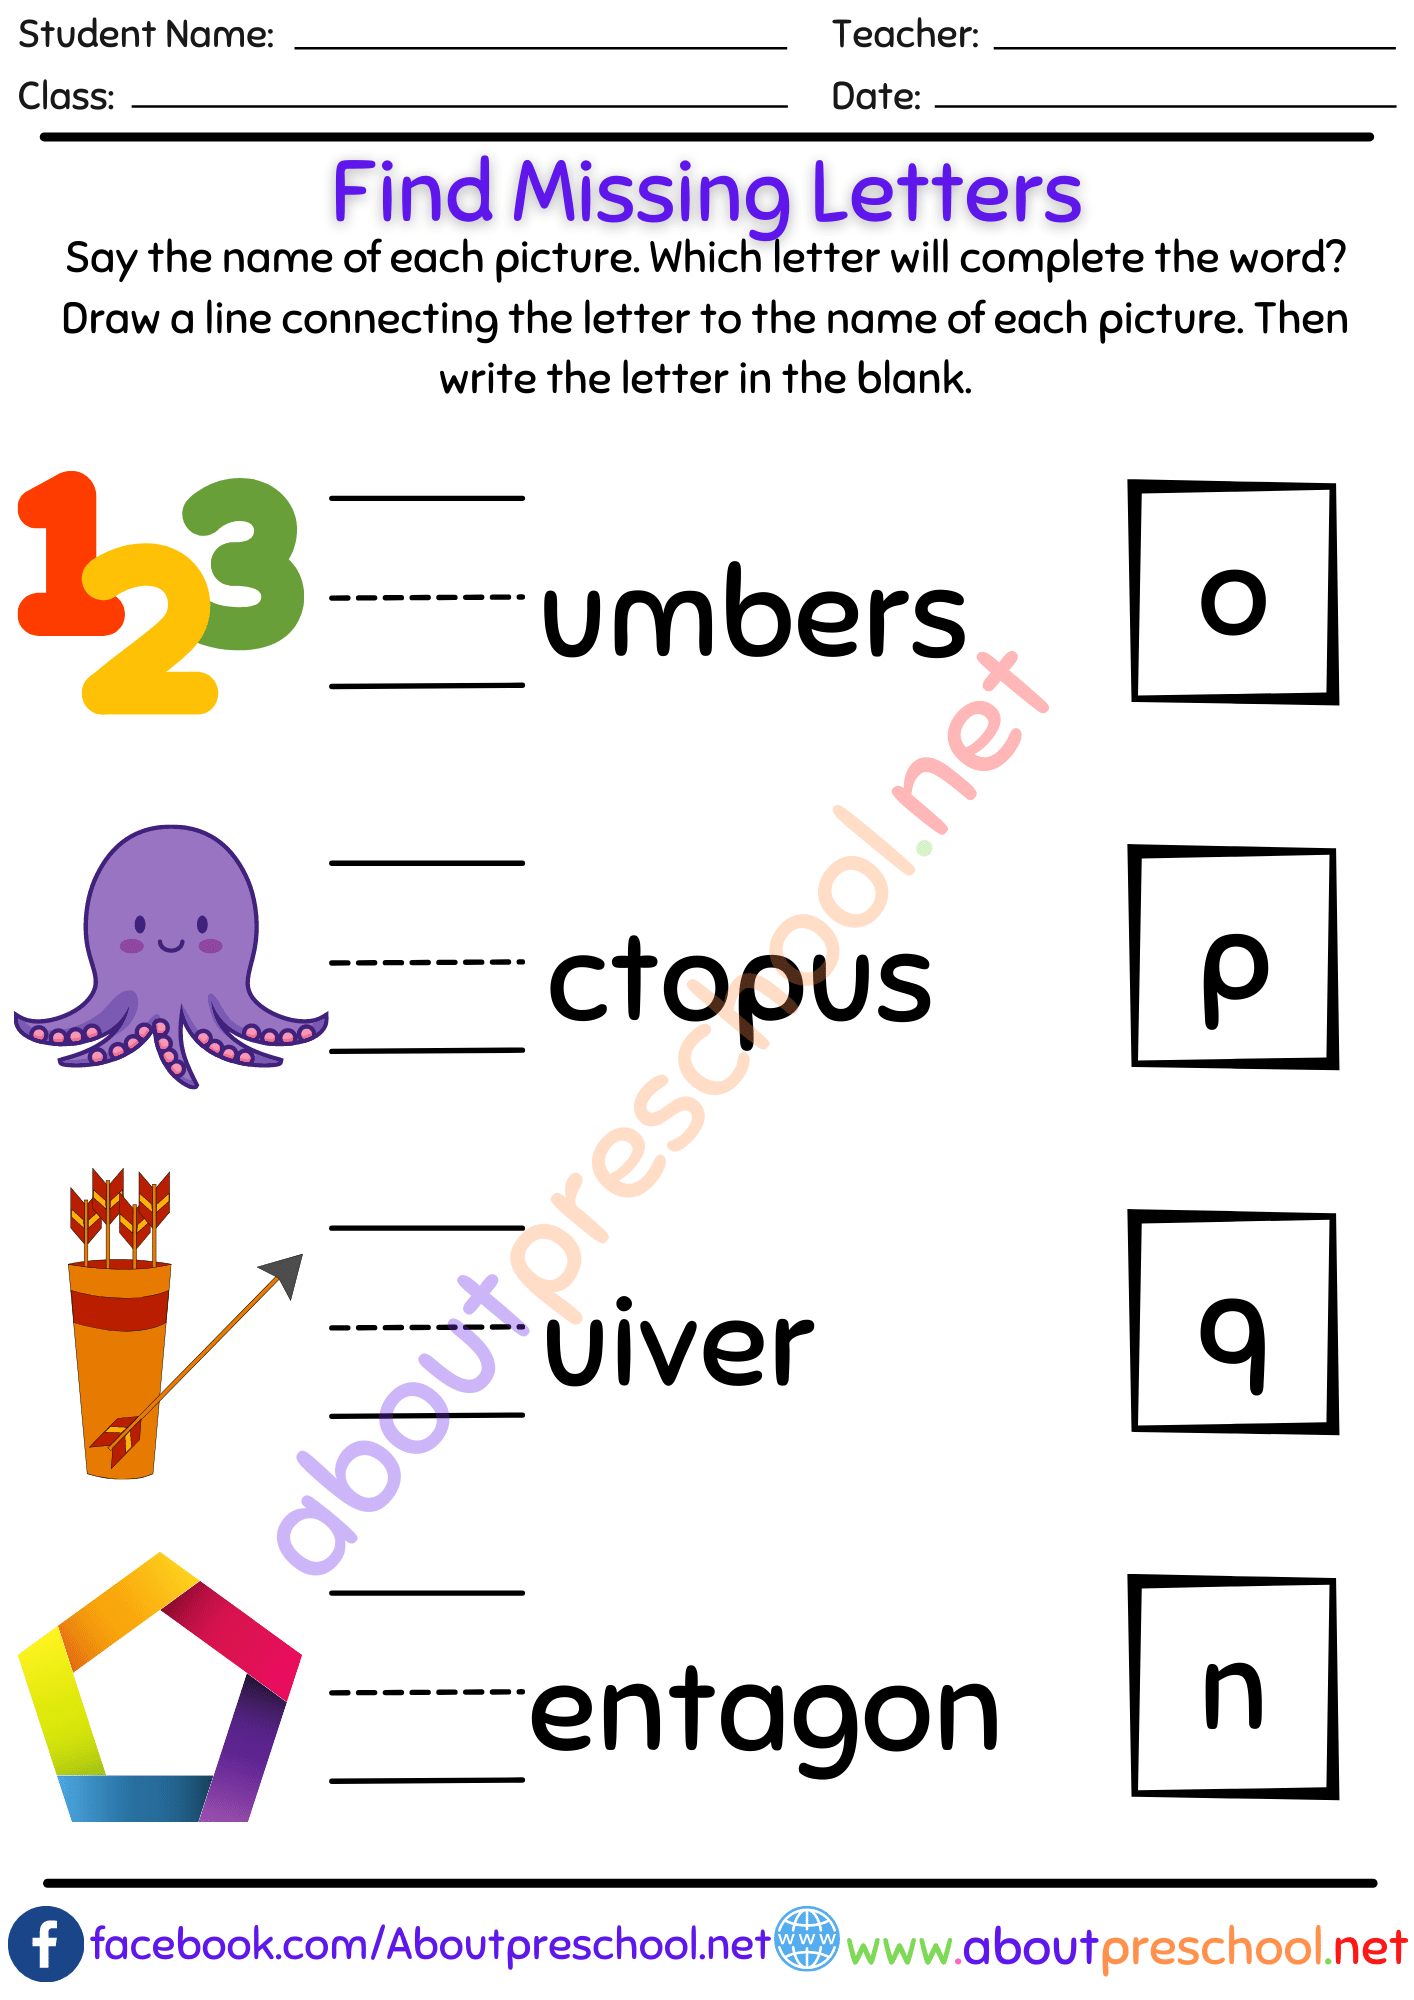 Find Missing Letters 6